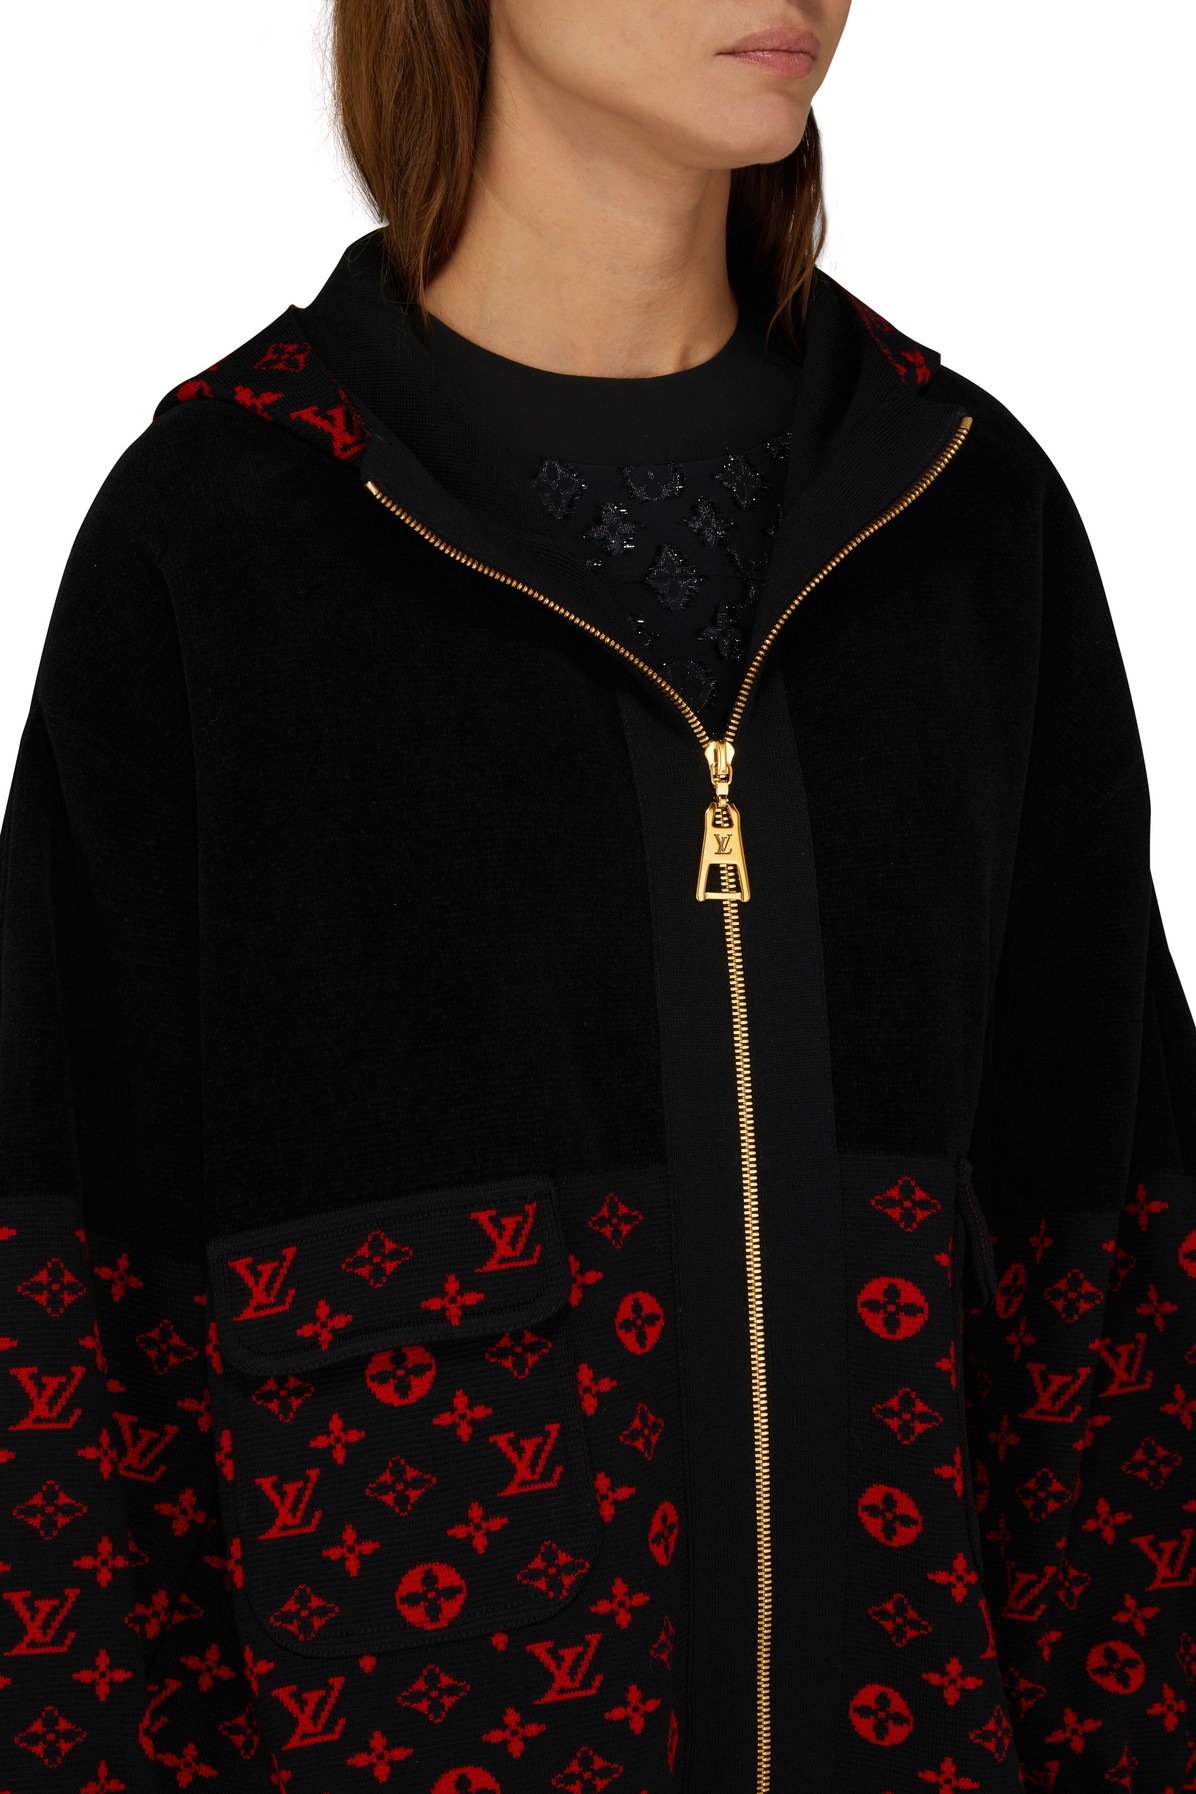 NWT authentic Louis VUITTON MONOGRAM KNIT OVERSIZED HOODIE